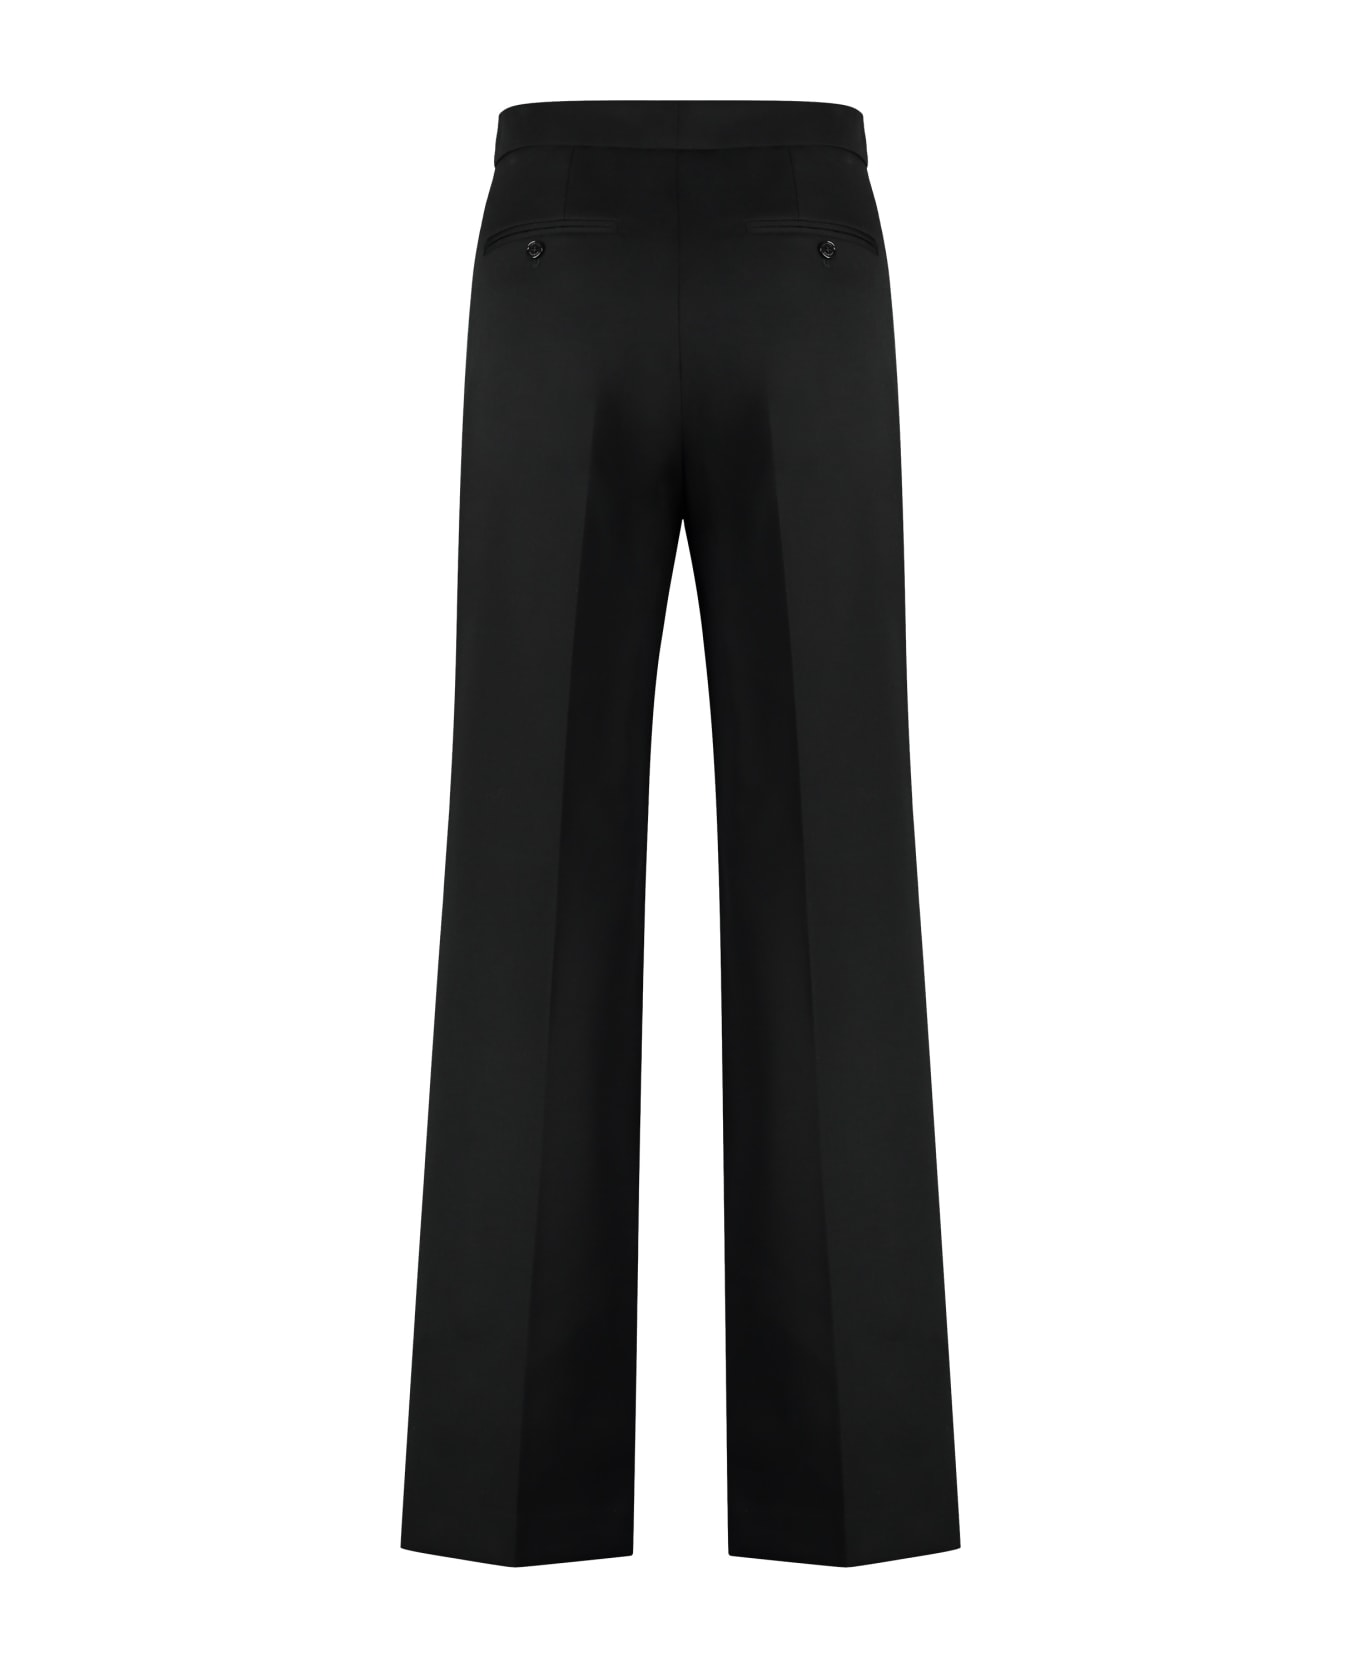 Isabel Marant Scarly Wool Trousers - black ボトムス